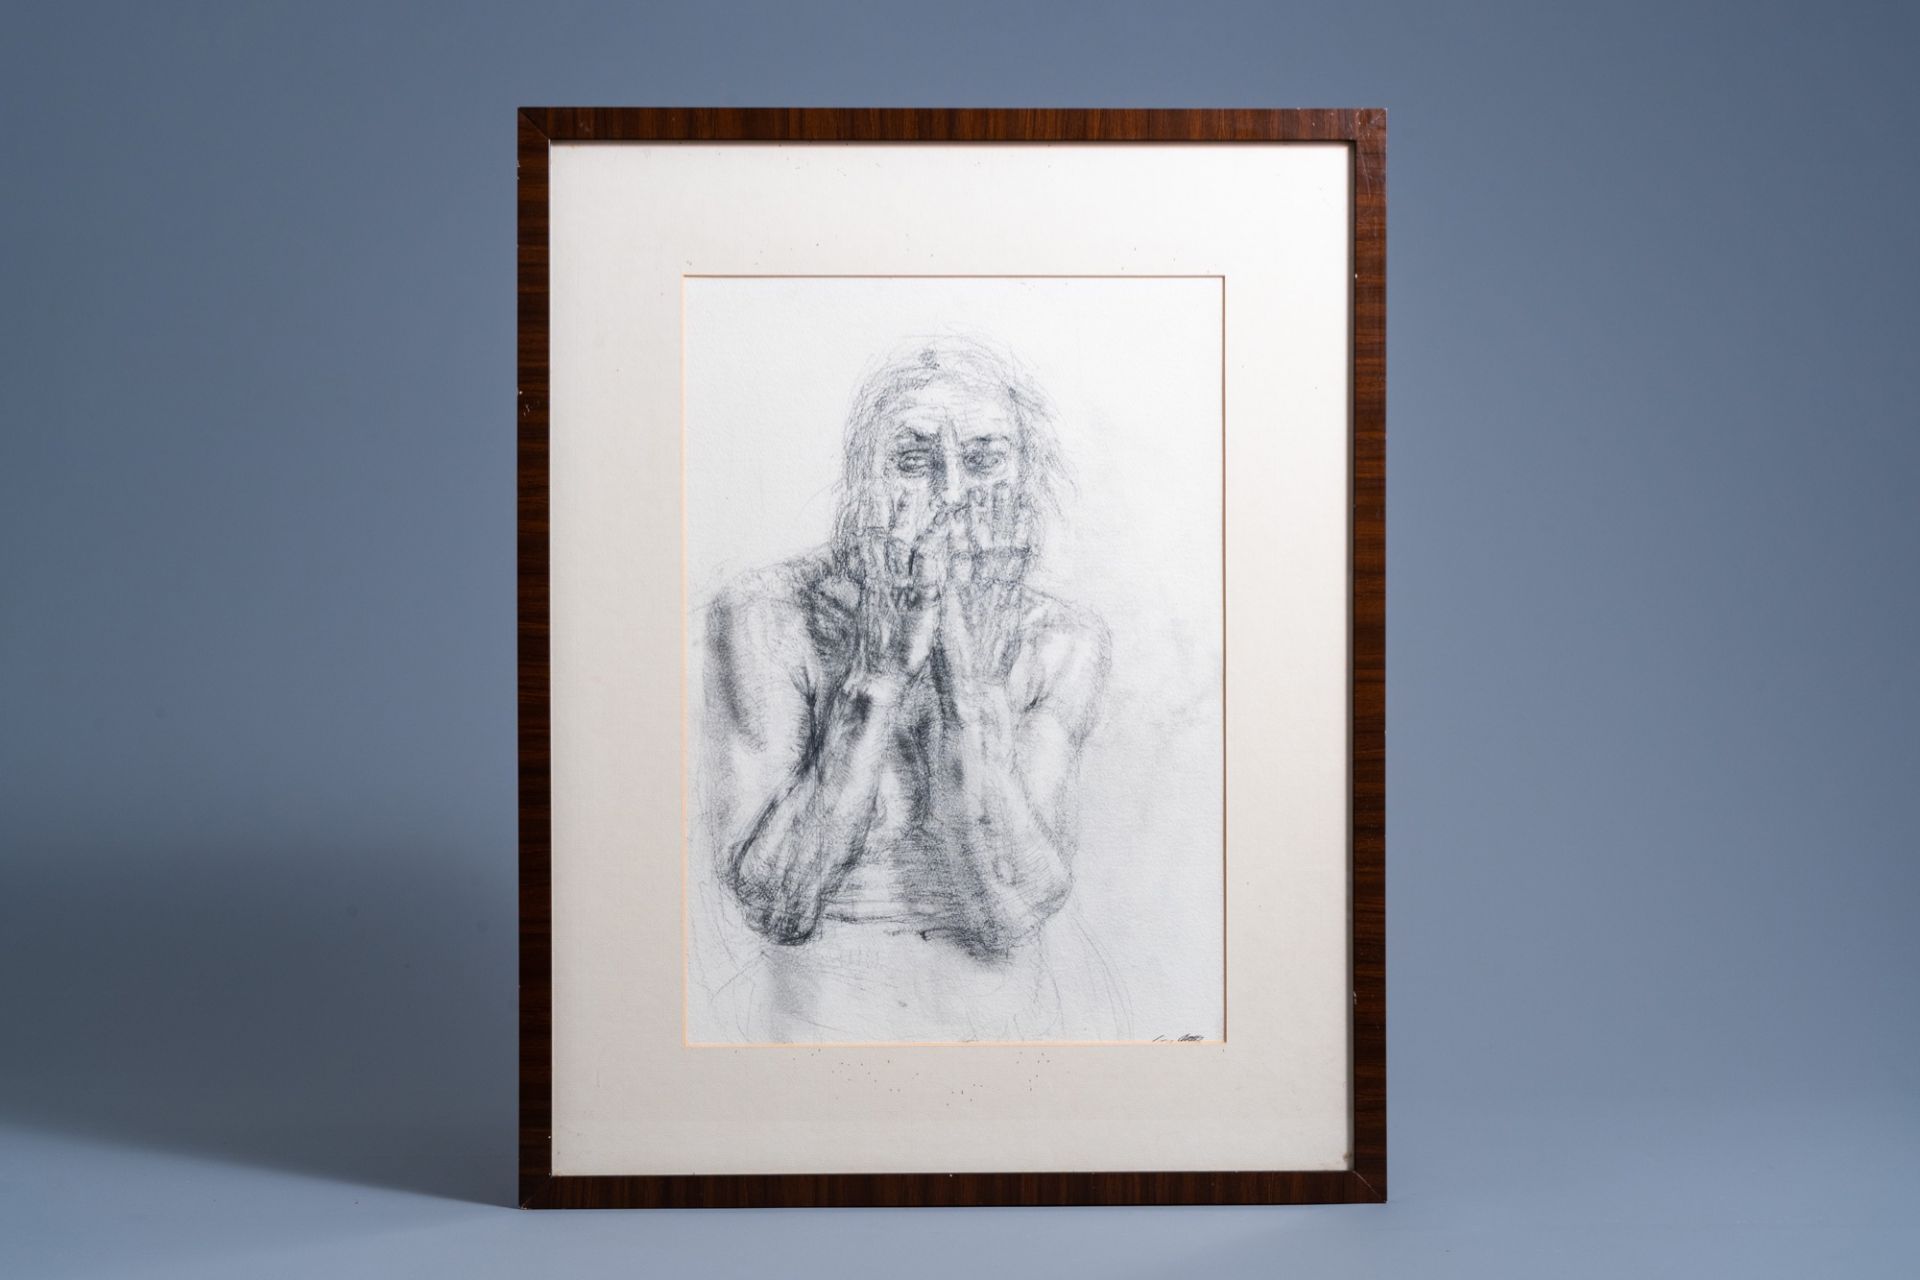 Kei Mitsuuchi (1948-2001): Study of an elderly anxious man, pencil on paper - Image 2 of 4